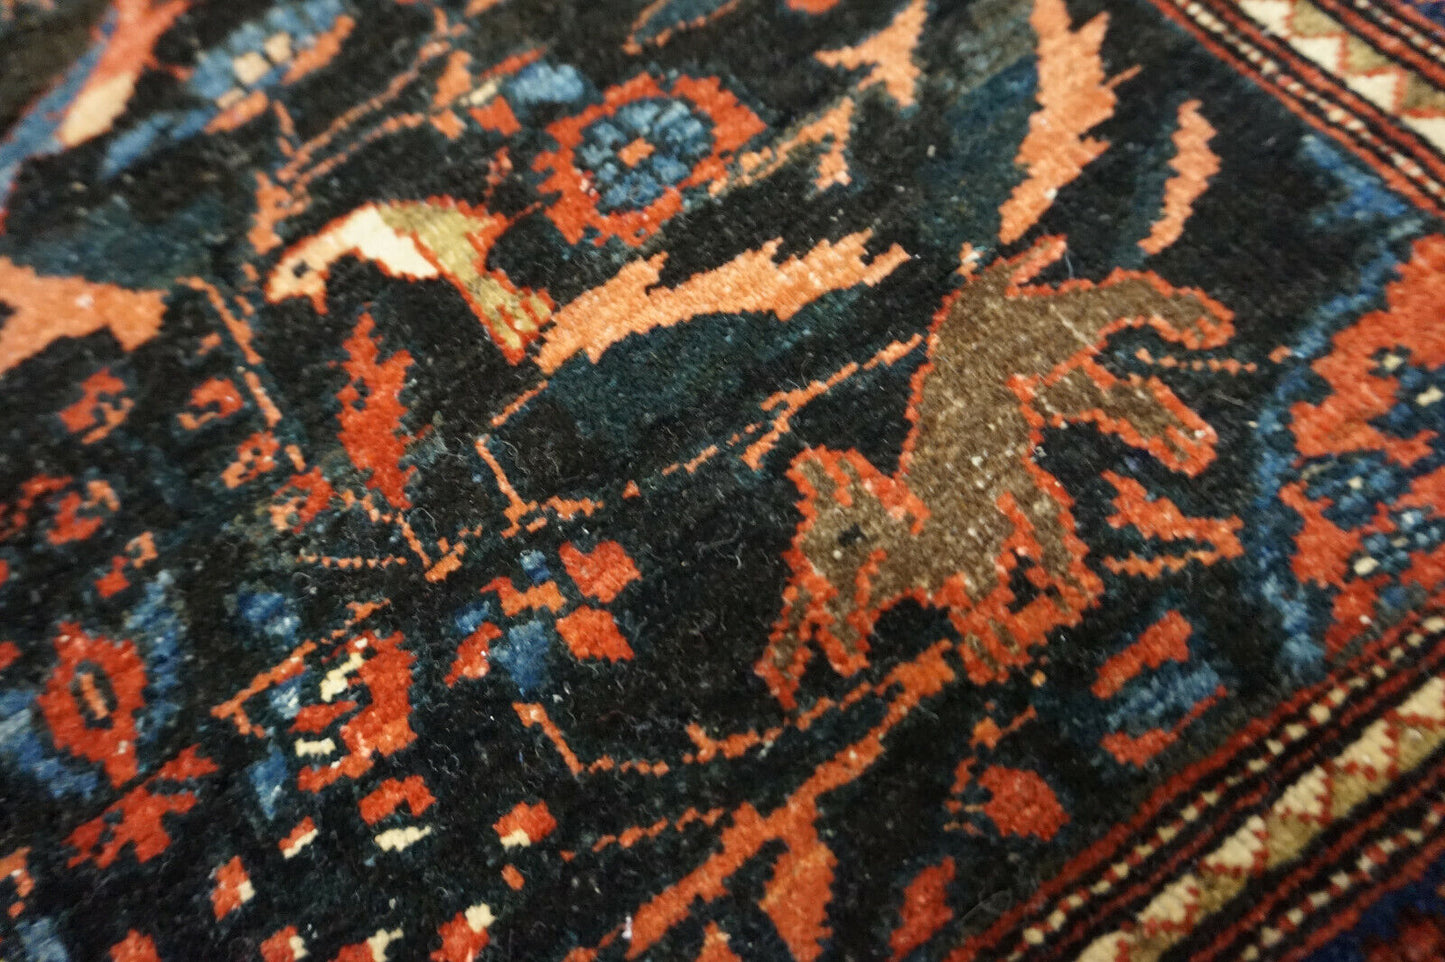 Close-up of the intricate animal motifs on the Handmade Antique Persian Tehran Rug